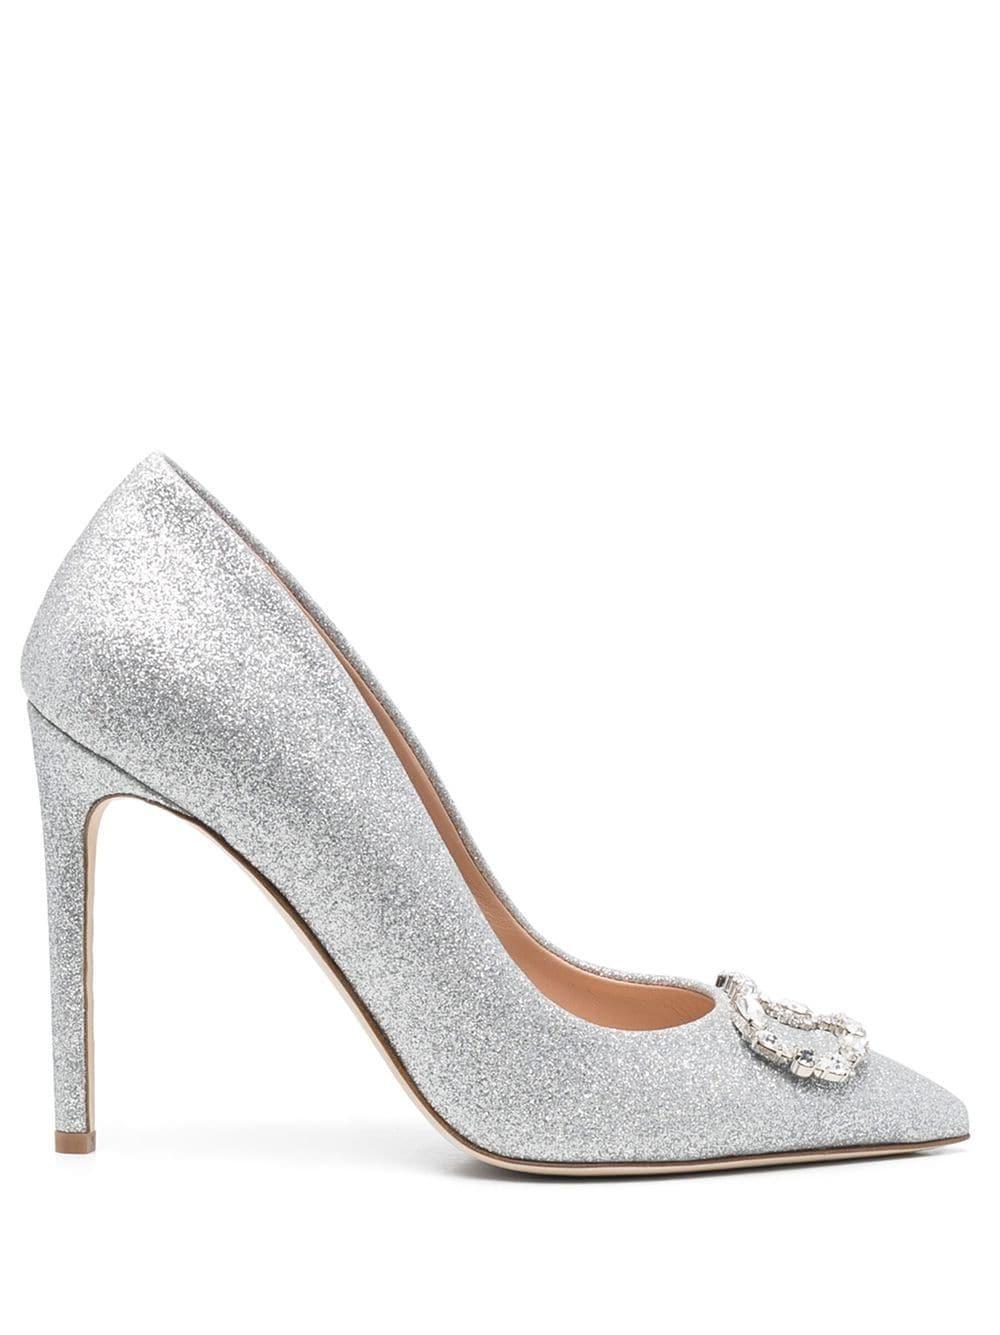 Dee Ocleppo 100mm Embellished Logo-plaque Pumps in White | Lyst